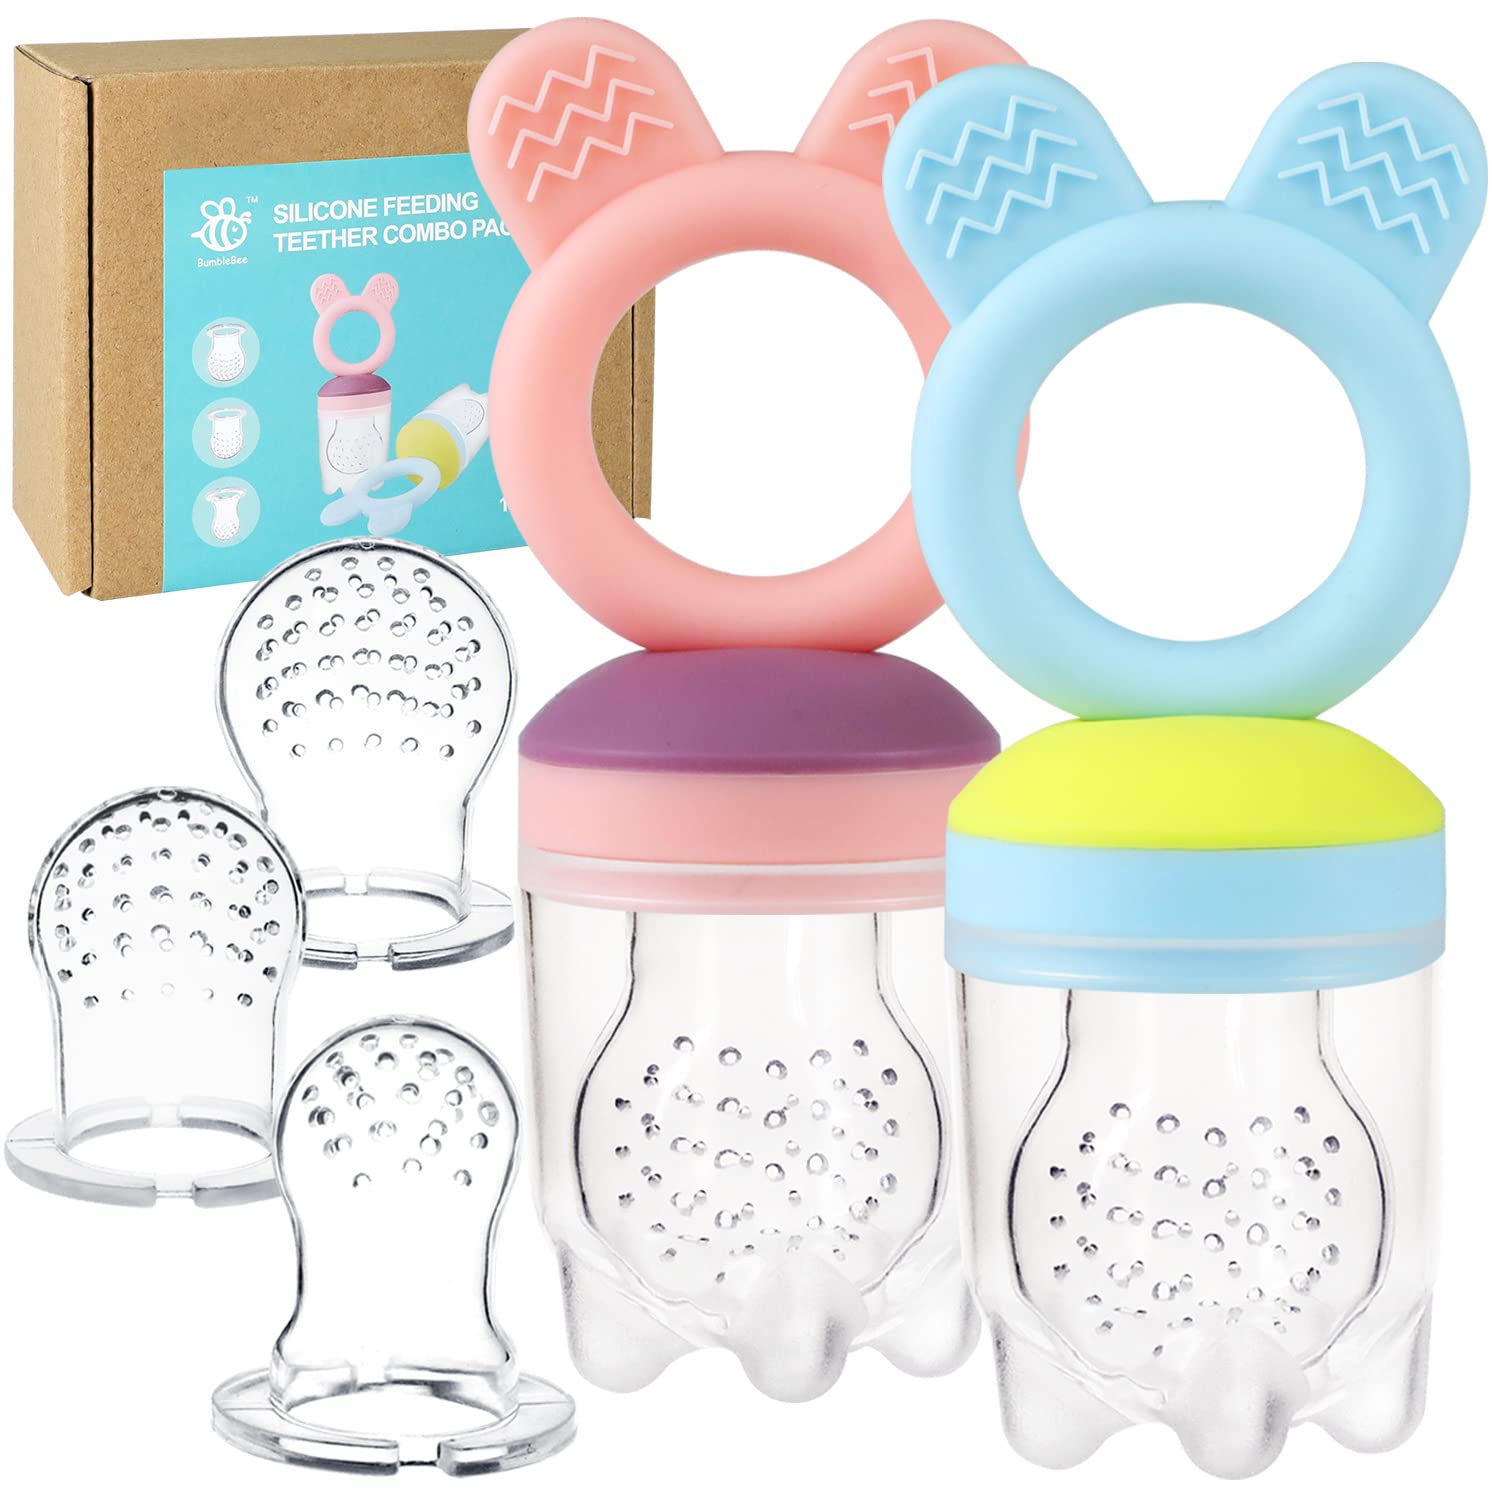 Baby Fruit Food Feeder PacifierTeether Toys Set - Silicone Fresh